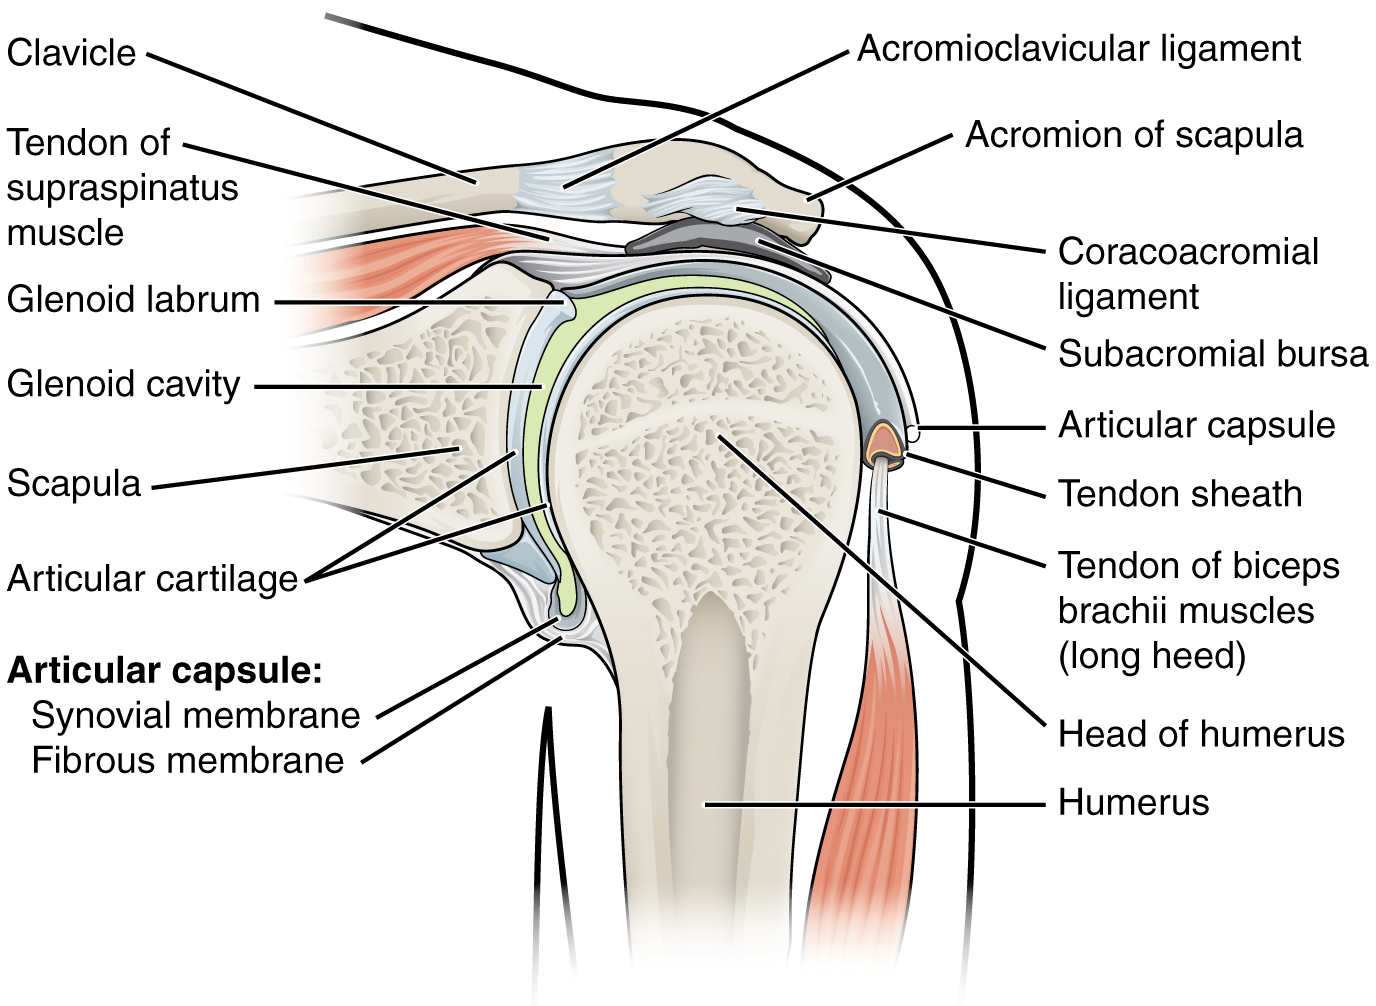 This figure shows the structure of the shoulder joint. The main ligaments and parts are labeled.